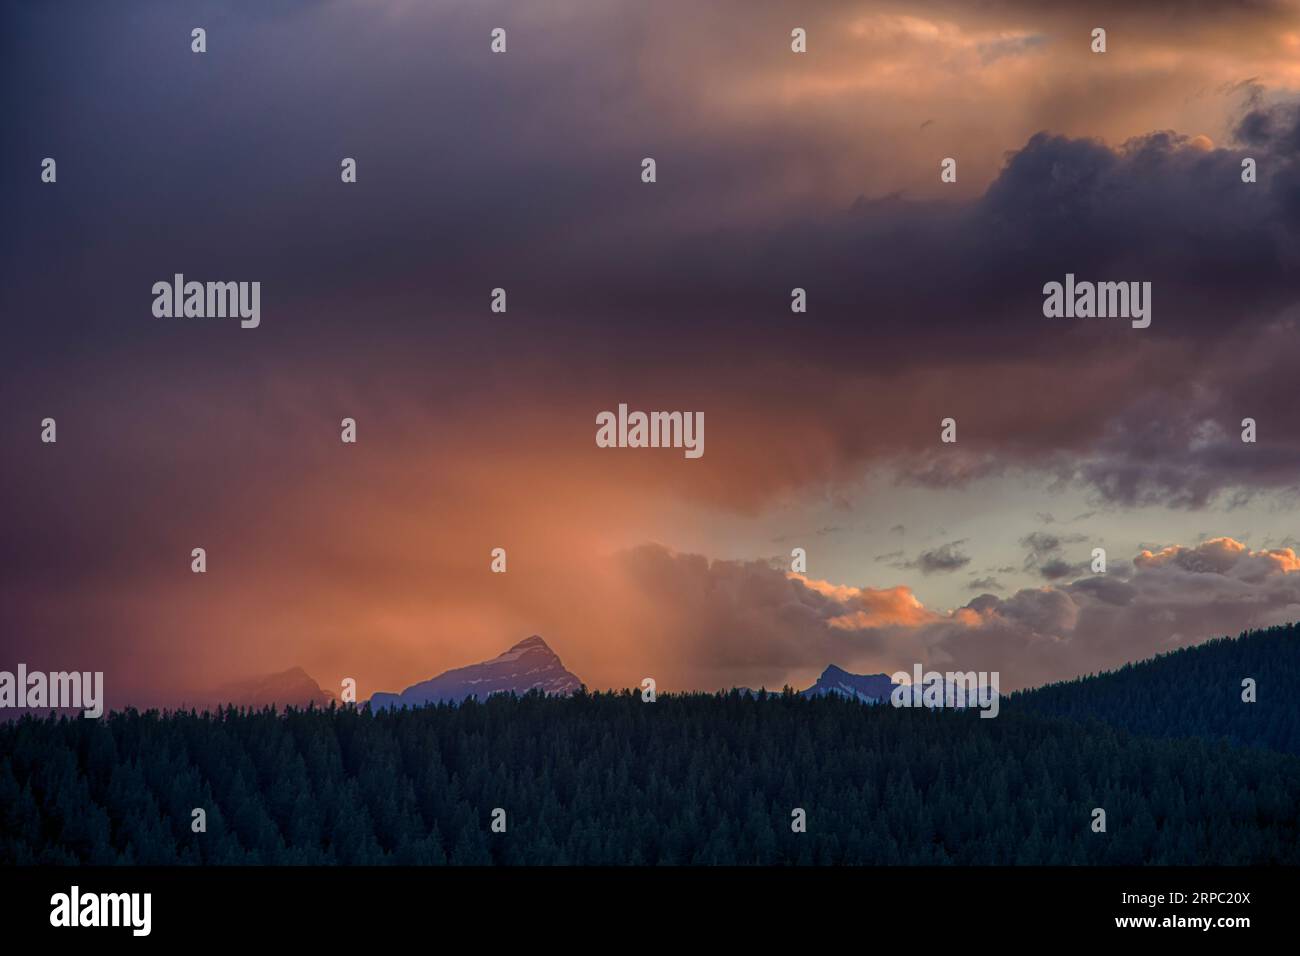 Sunrise over mountains, forest Stock Photo